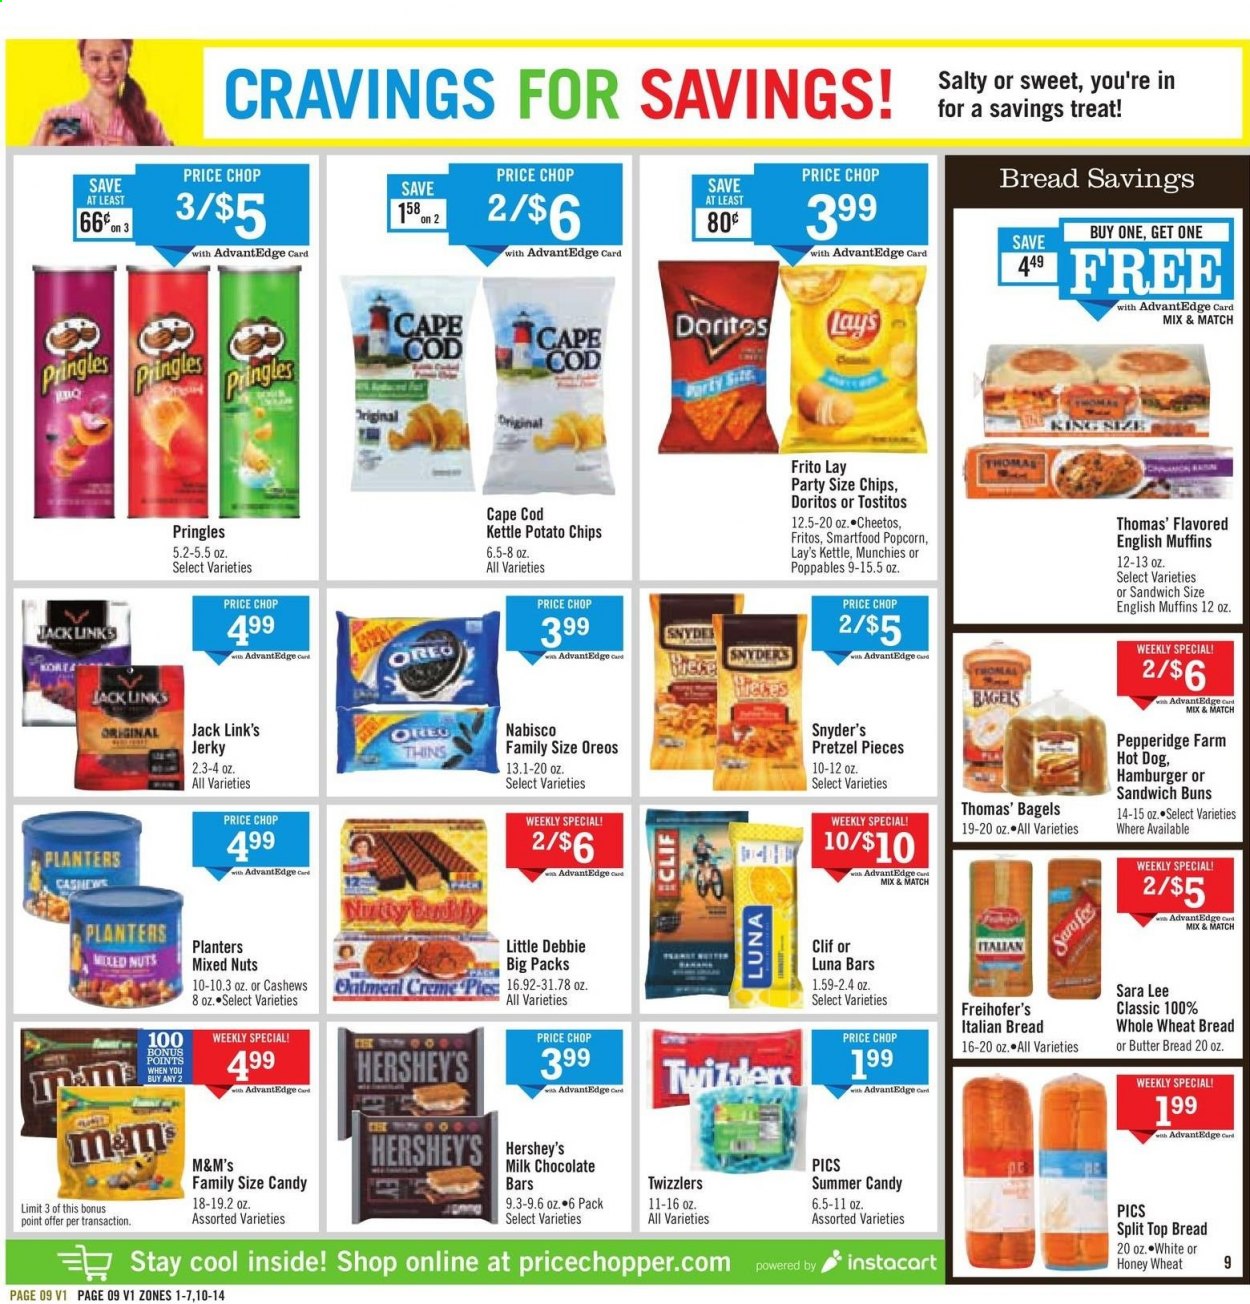 thumbnail - Price Chopper Flyer - 06/20/2021 - 06/26/2021 - Sales products - bagels, english muffins, wheat bread, pretzels, buns, Sara Lee, cod, hot dog, sandwich, hamburger, jerky, Oreo, Hershey's, milk chocolate, M&M's, chocolate bar, Doritos, Fritos, potato chips, Pringles, Cheetos, chips, Lay’s, Smartfood, Thins, popcorn, Tostitos, Jack Link's, cashews, mixed nuts, Planters. Page 9.